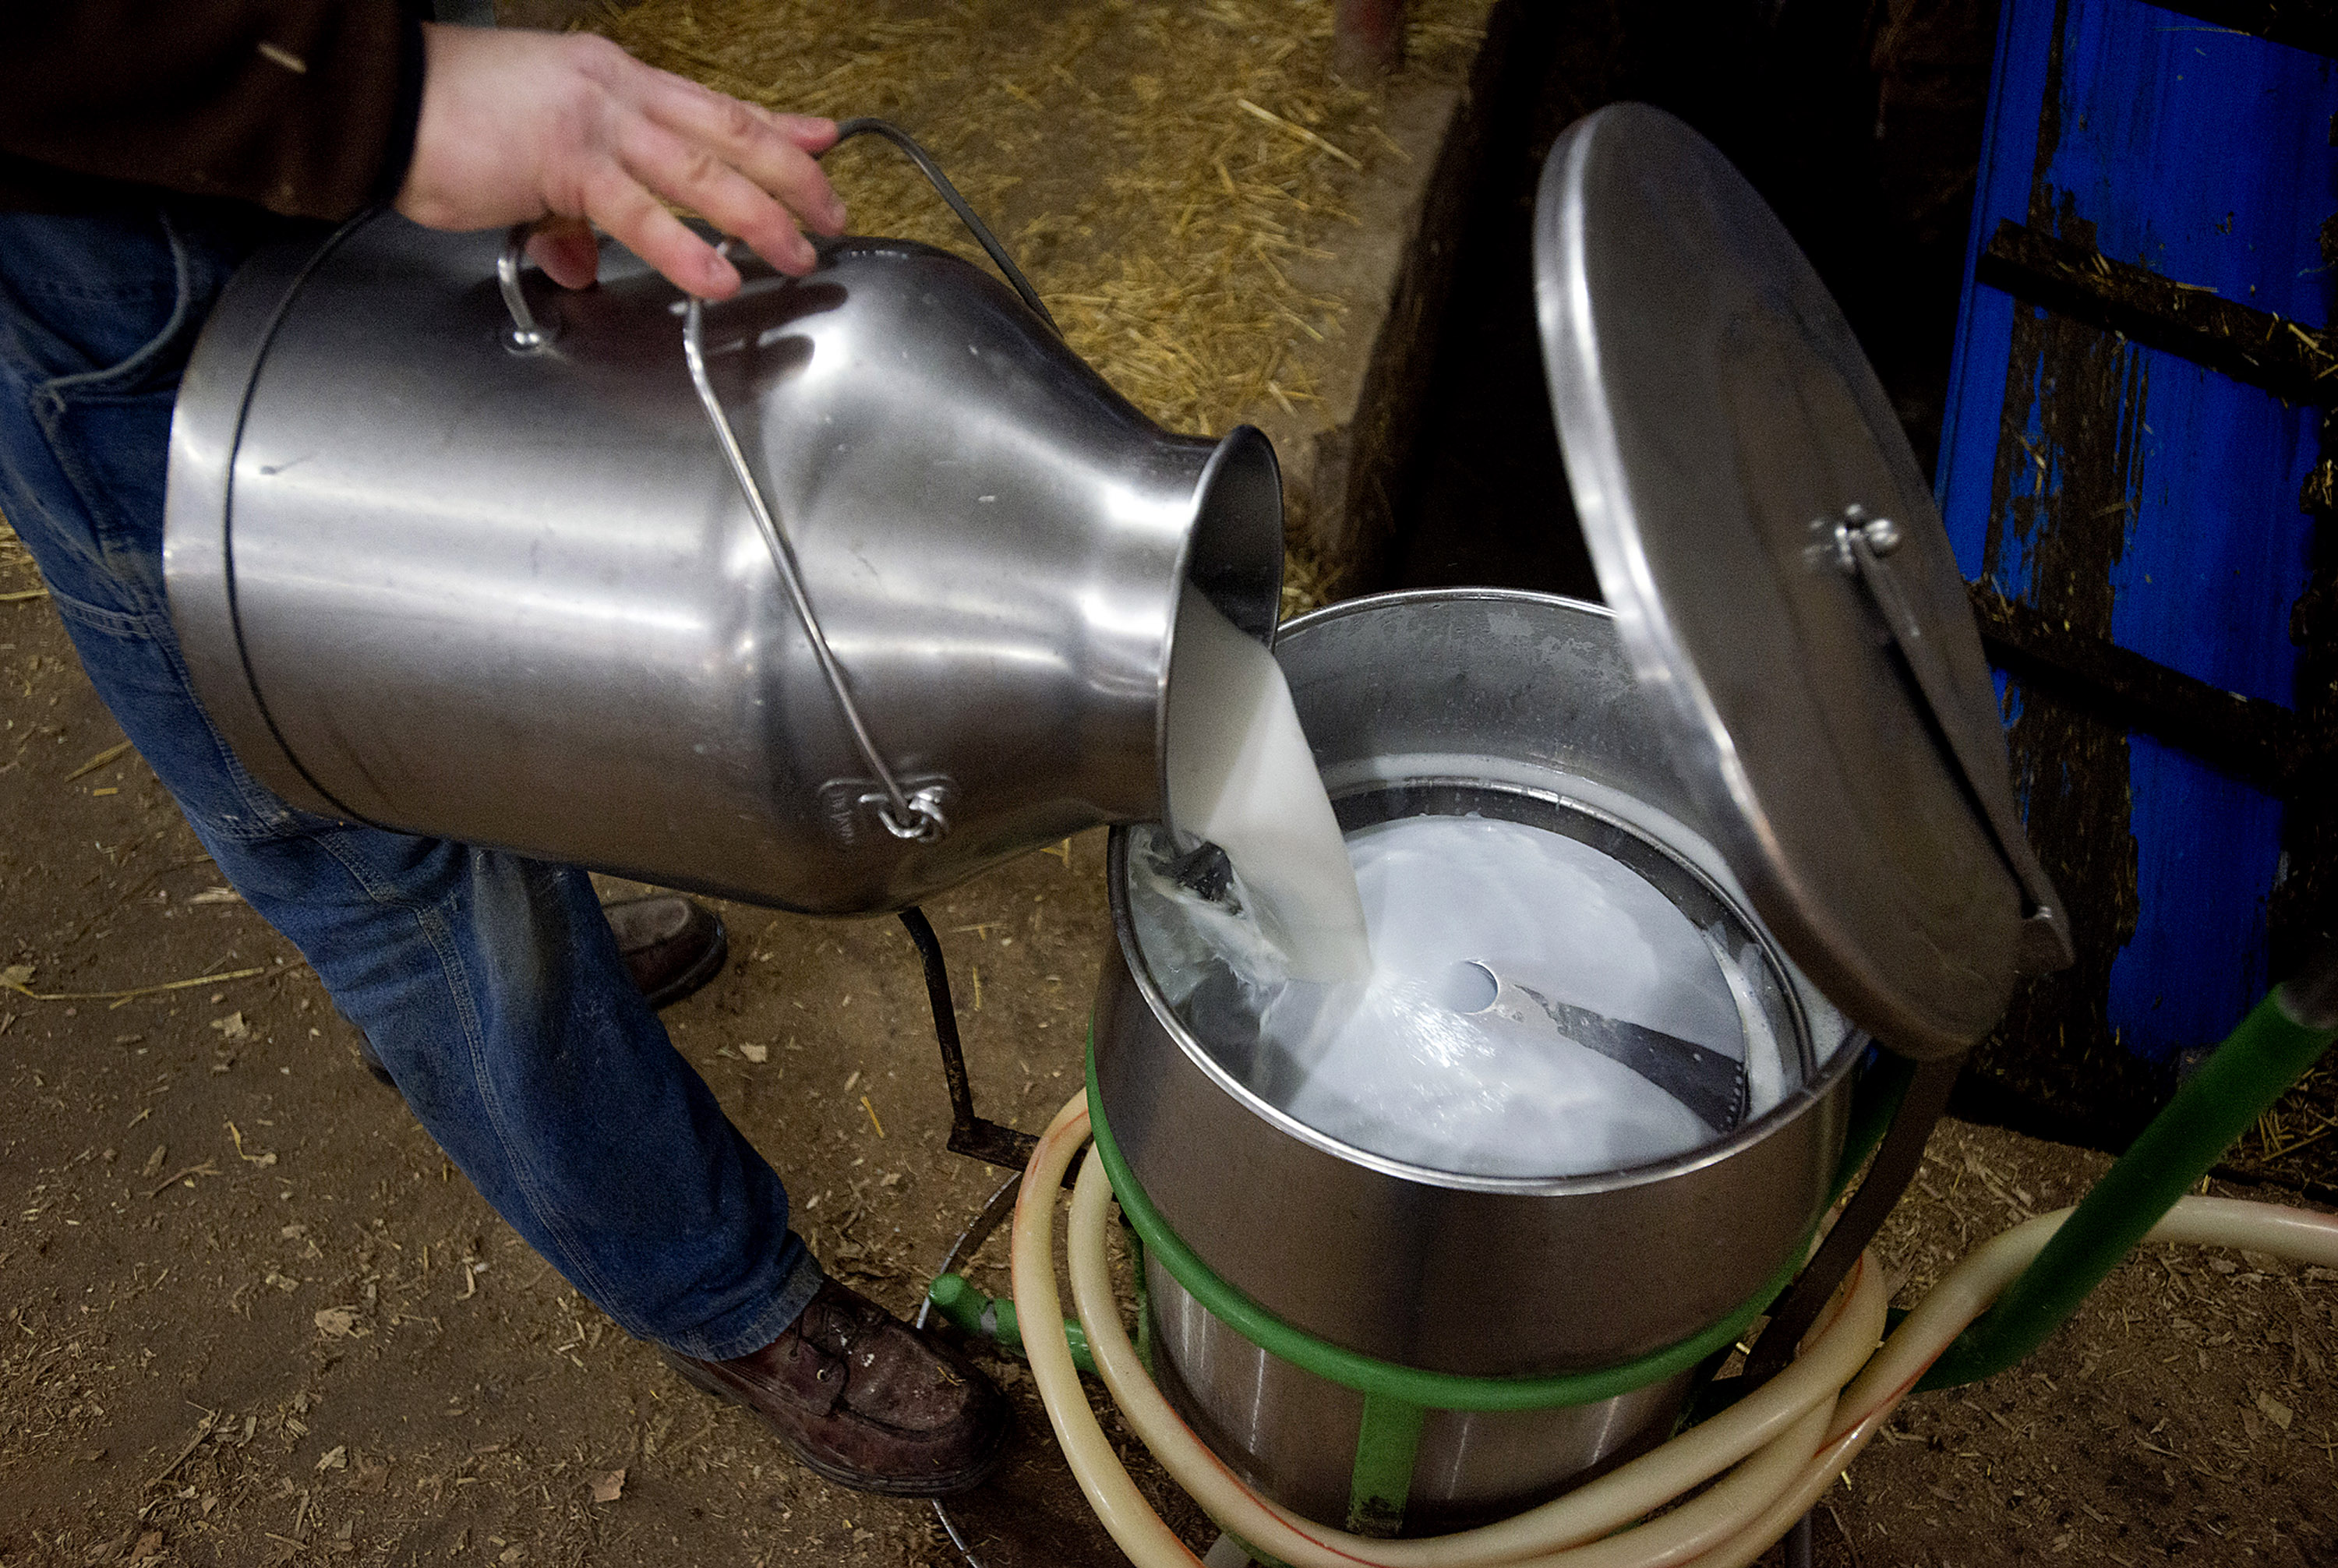 Freshly extracted milk from cows is poured into a holding tank.